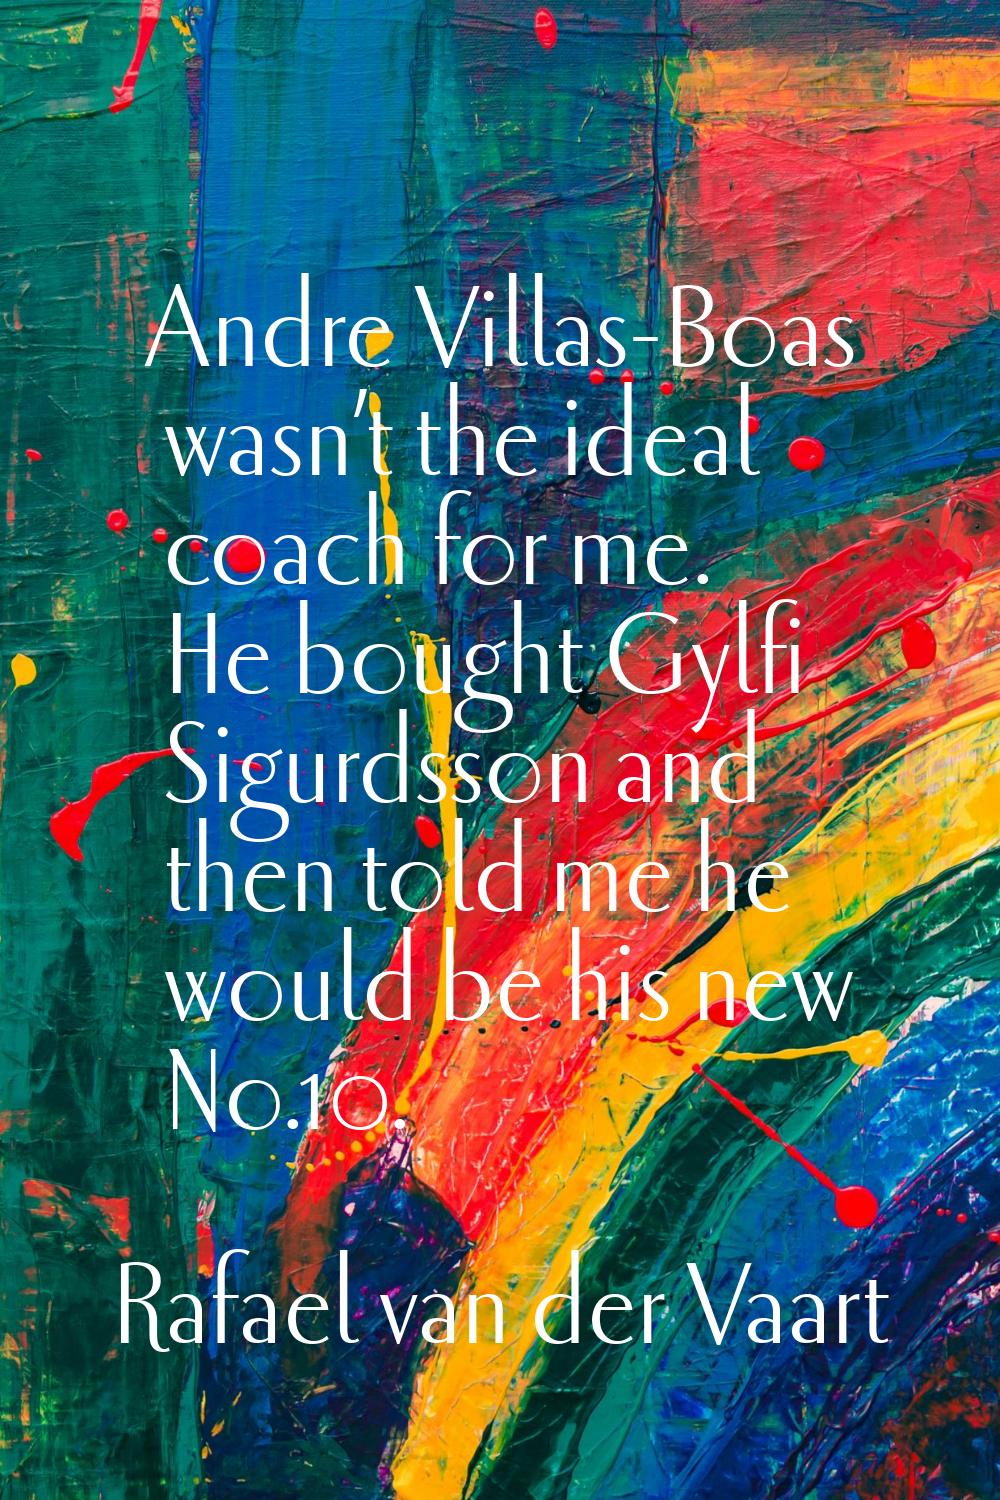 Andre Villas-Boas wasn’t the ideal coach for me. He bought Gylfi Sigurdsson and then told me he wou